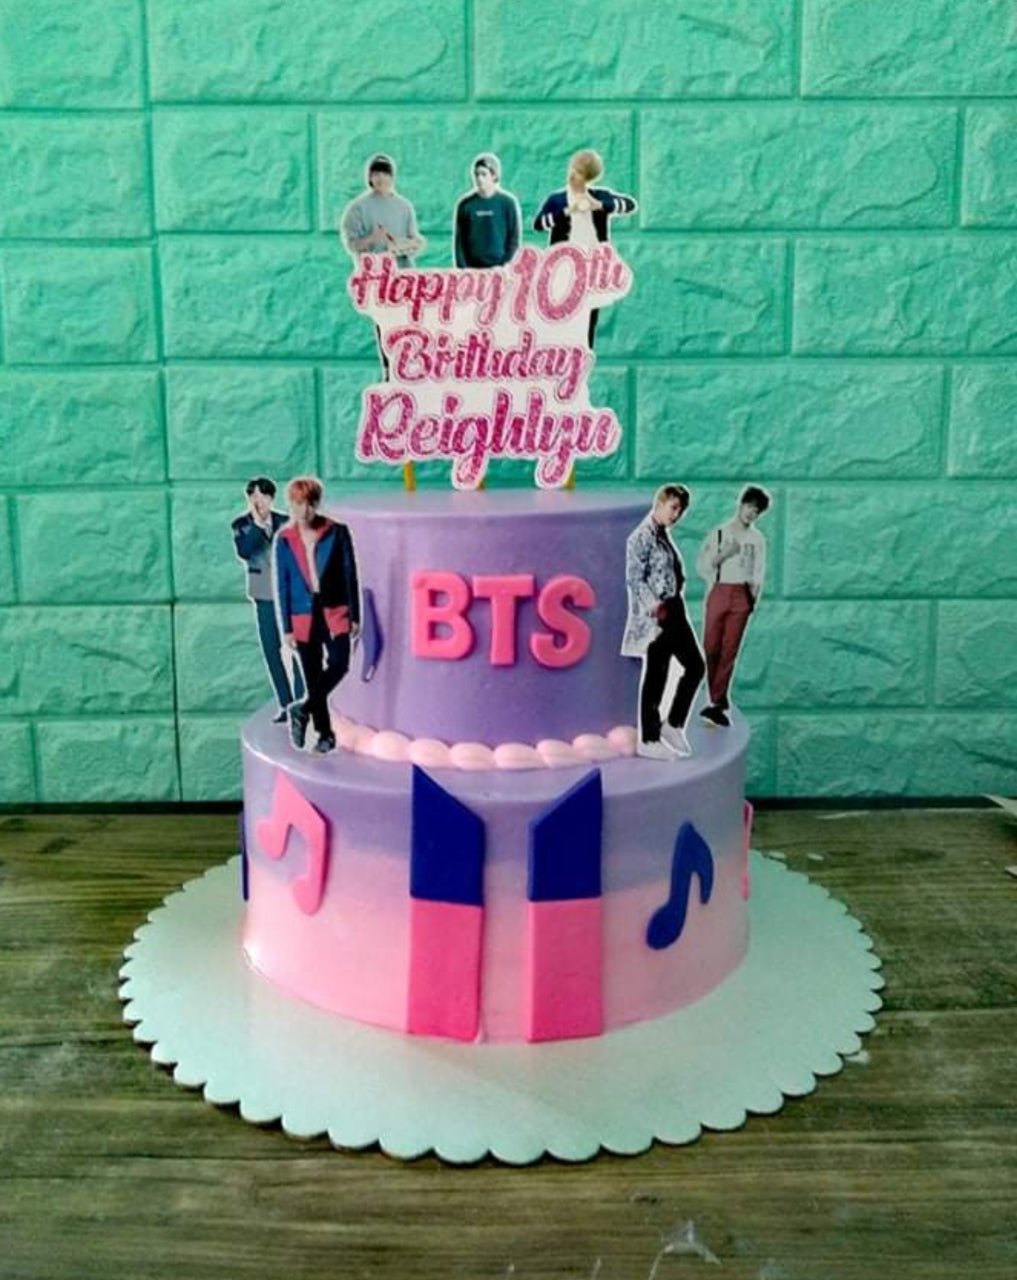 Mom and daughters team up to make BTS, BLACKPINK and K-pop star cakes -  Good Morning America